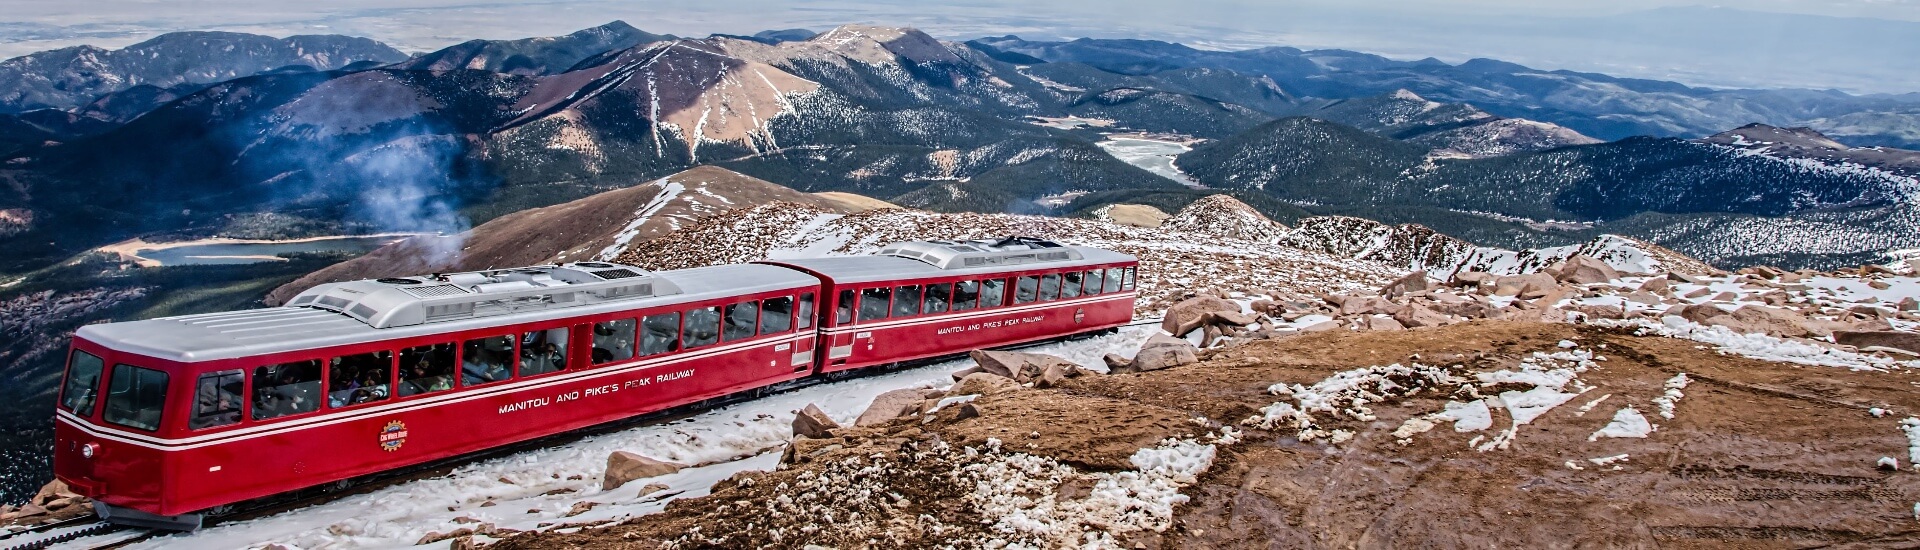 red train cars going up a mountain with snow capped mountains around